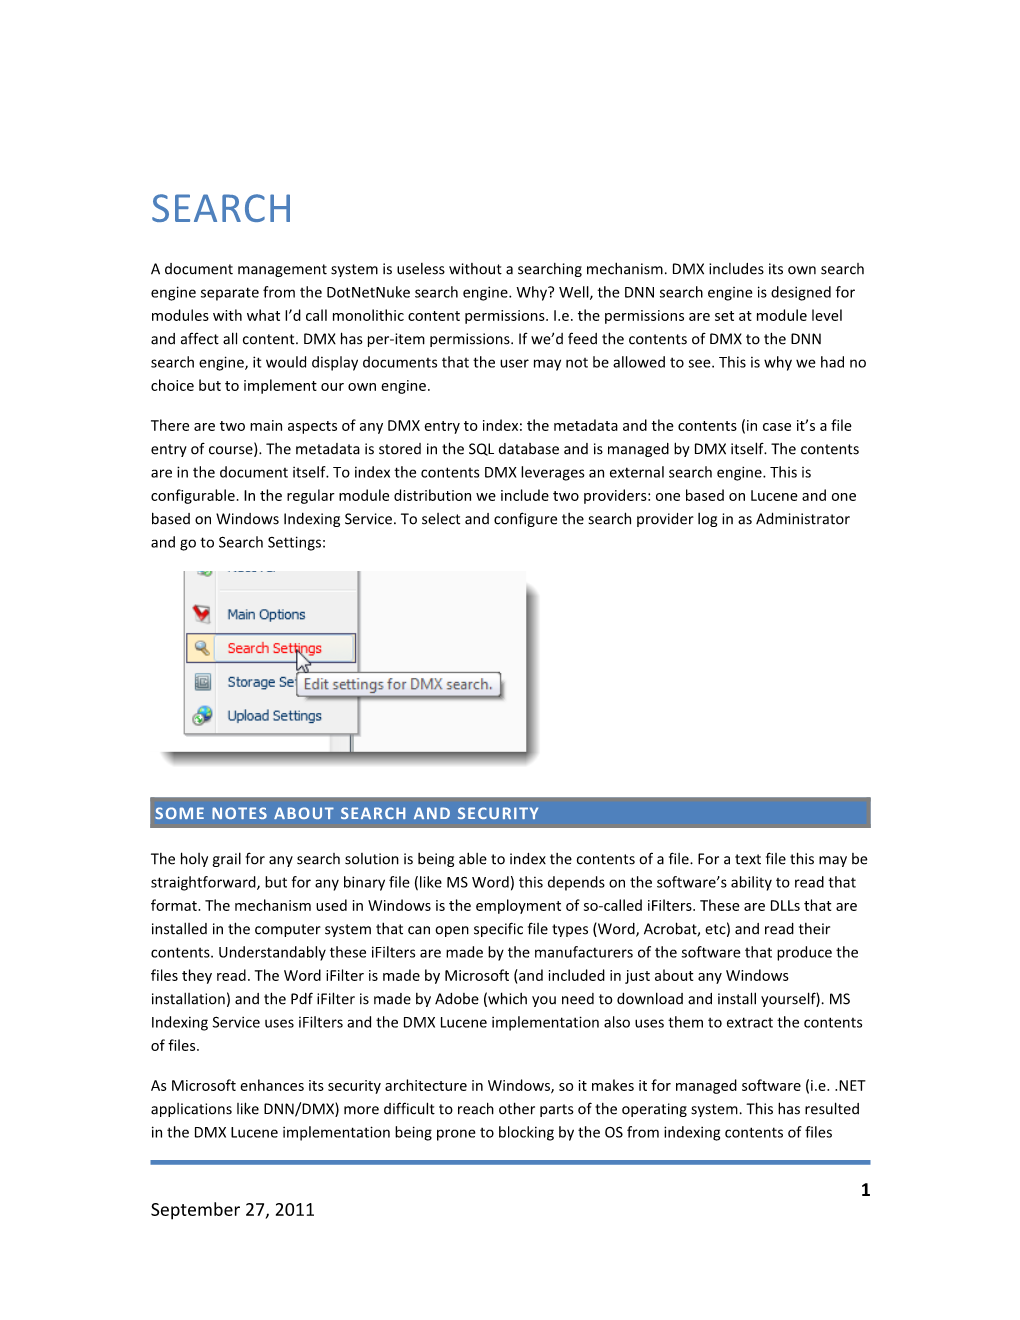 Some Notes About Search and Security